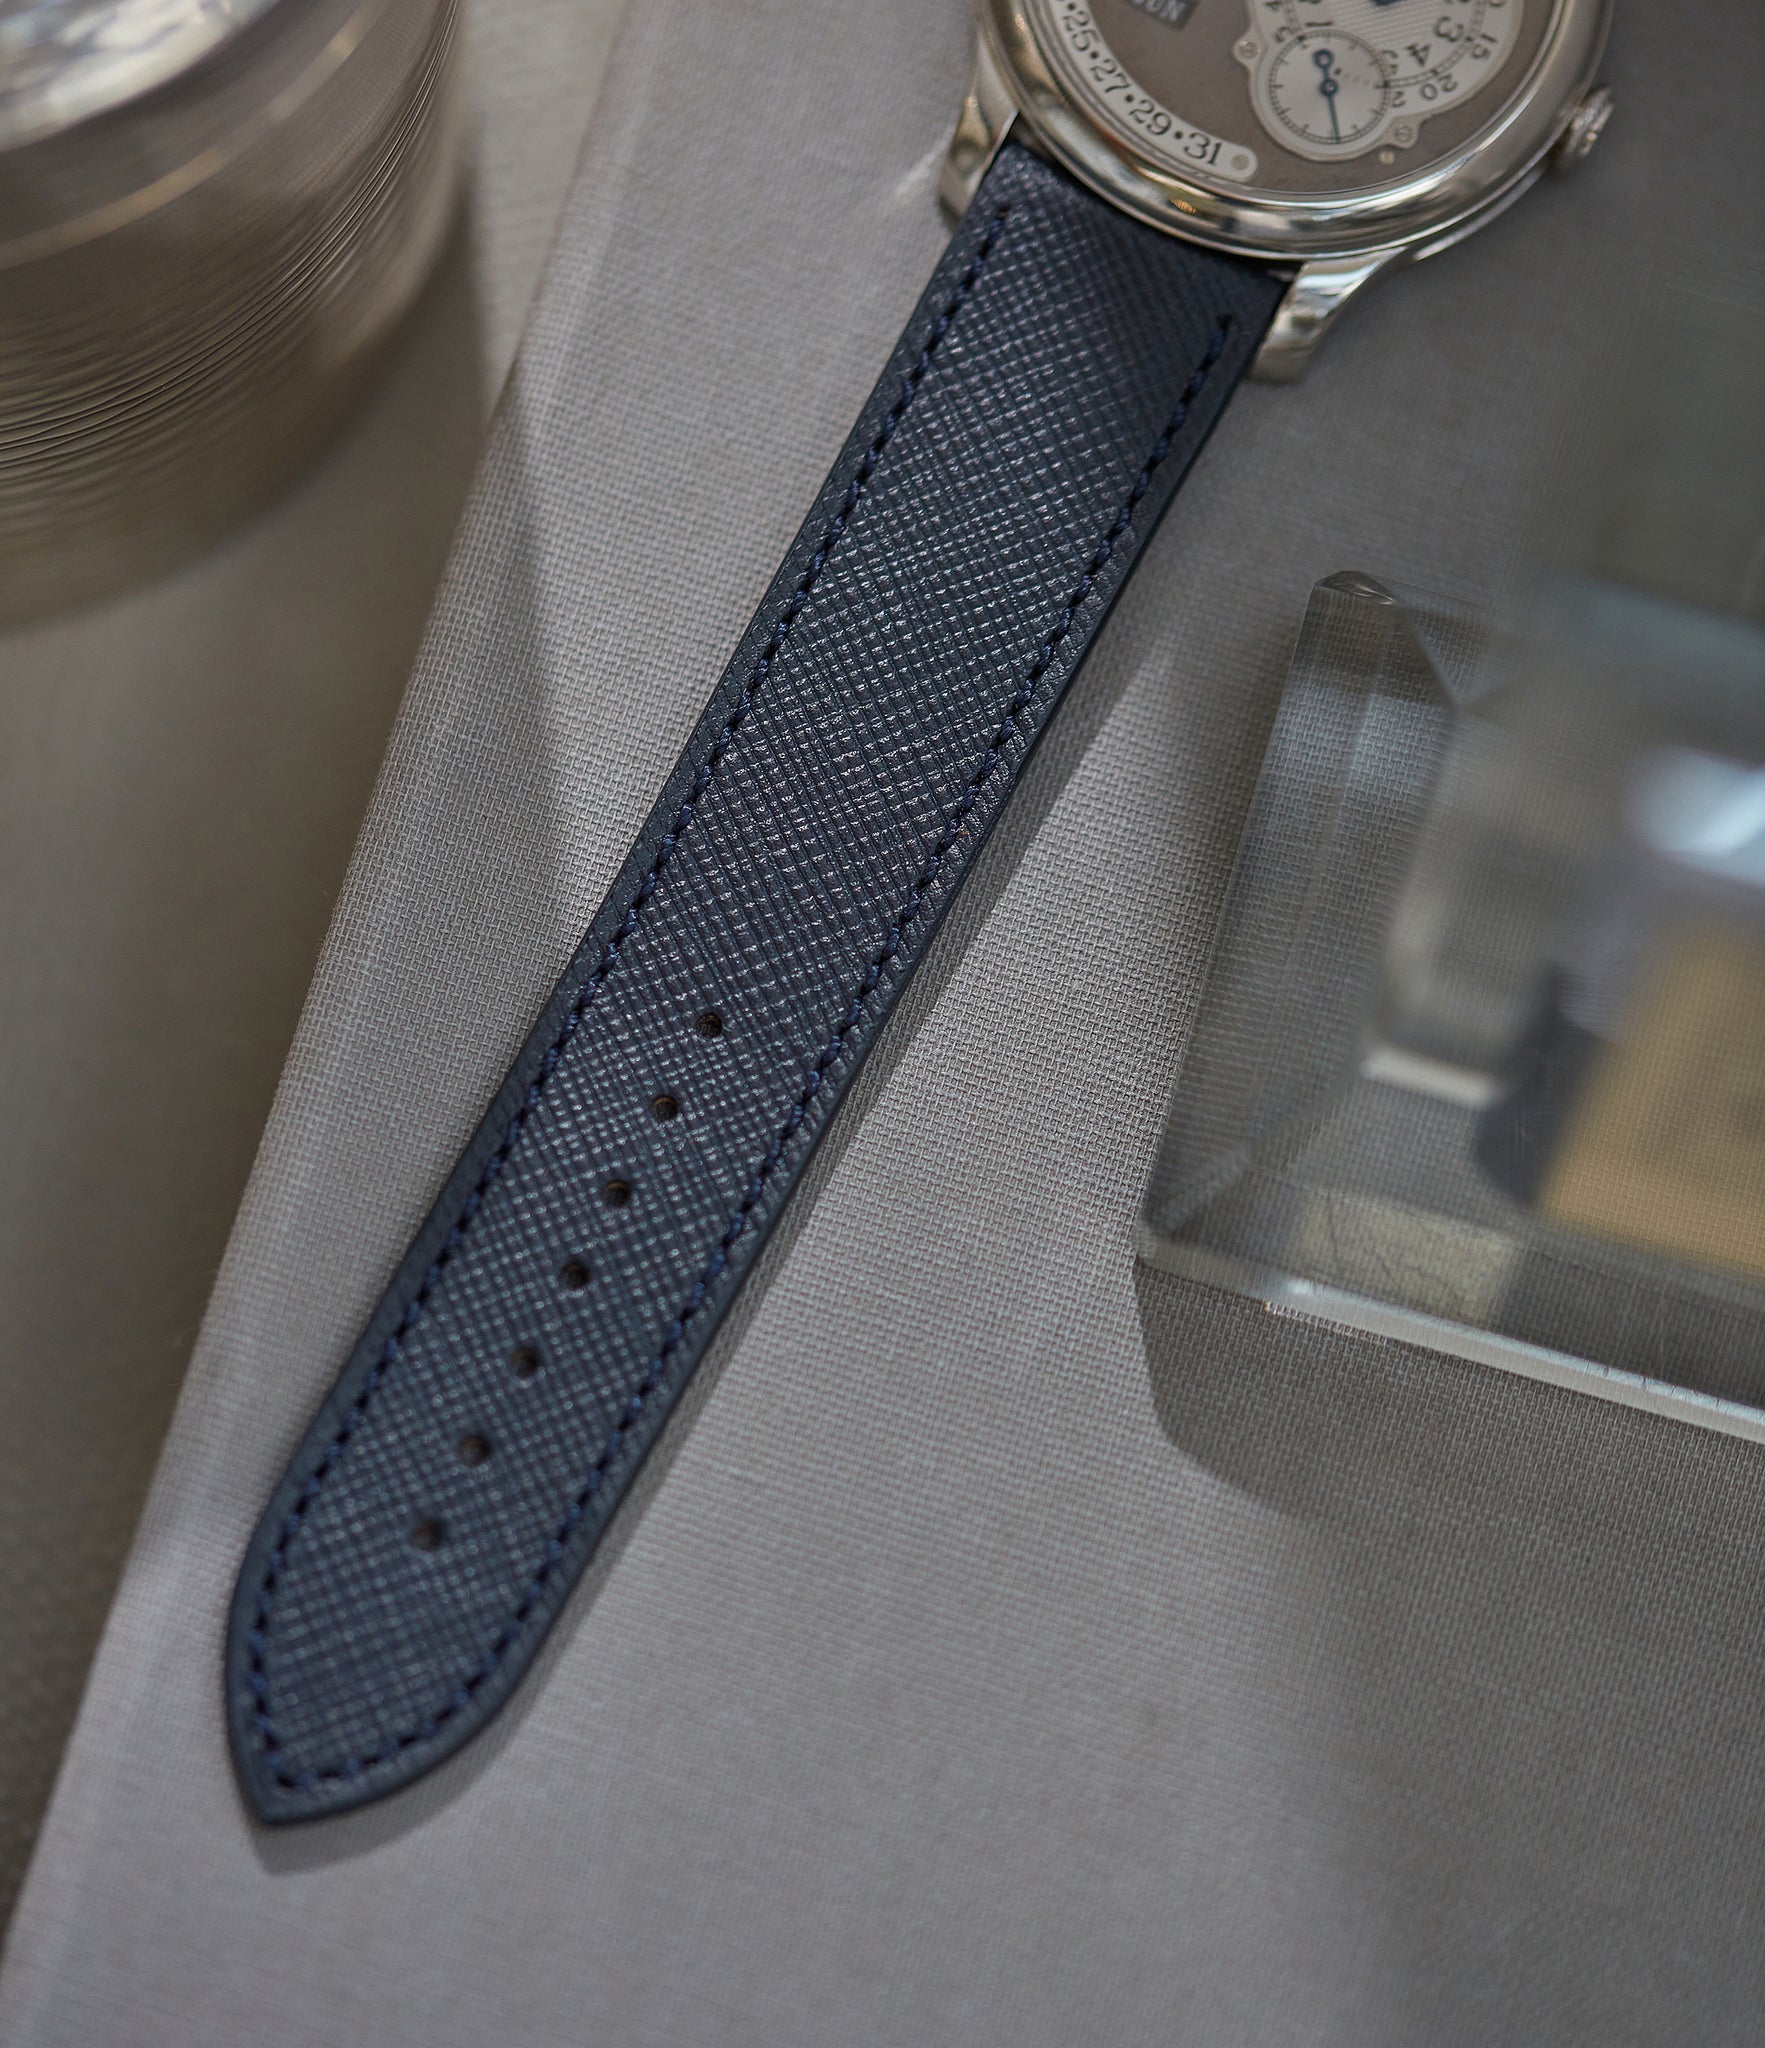 Buy saffiano quality watch strap in shadow navy blue from A Collected Man London, in short or regular lengths. We are proud to offer these hand-crafted watch straps, thoughtfully made in Europe, to suit your watch. Available to order online for worldwide delivery.